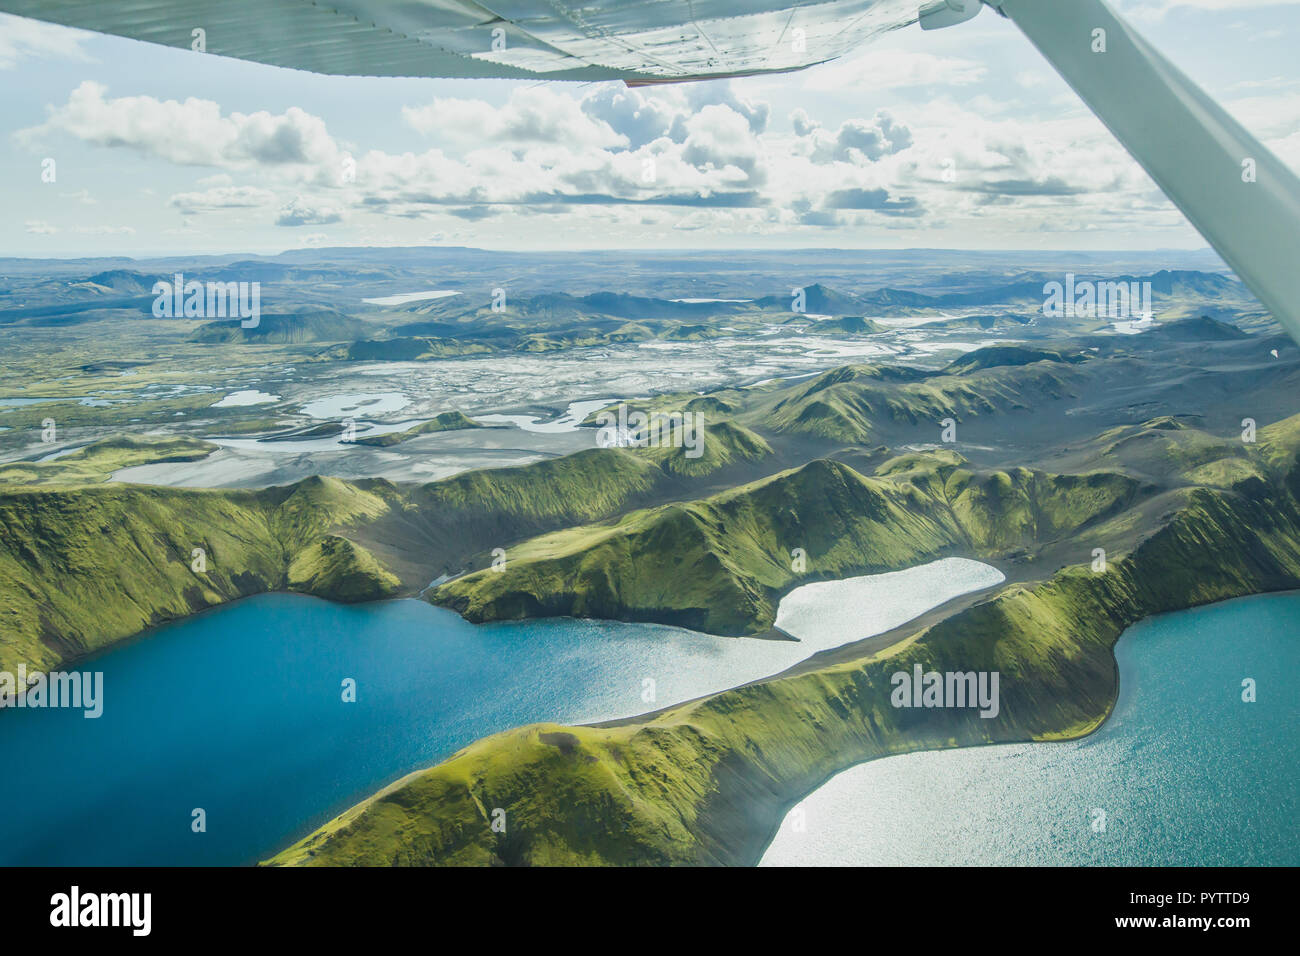 aerial landscape of nature in Iceland, volcanic mountains and lakes in highlands from small airplane Stock Photo